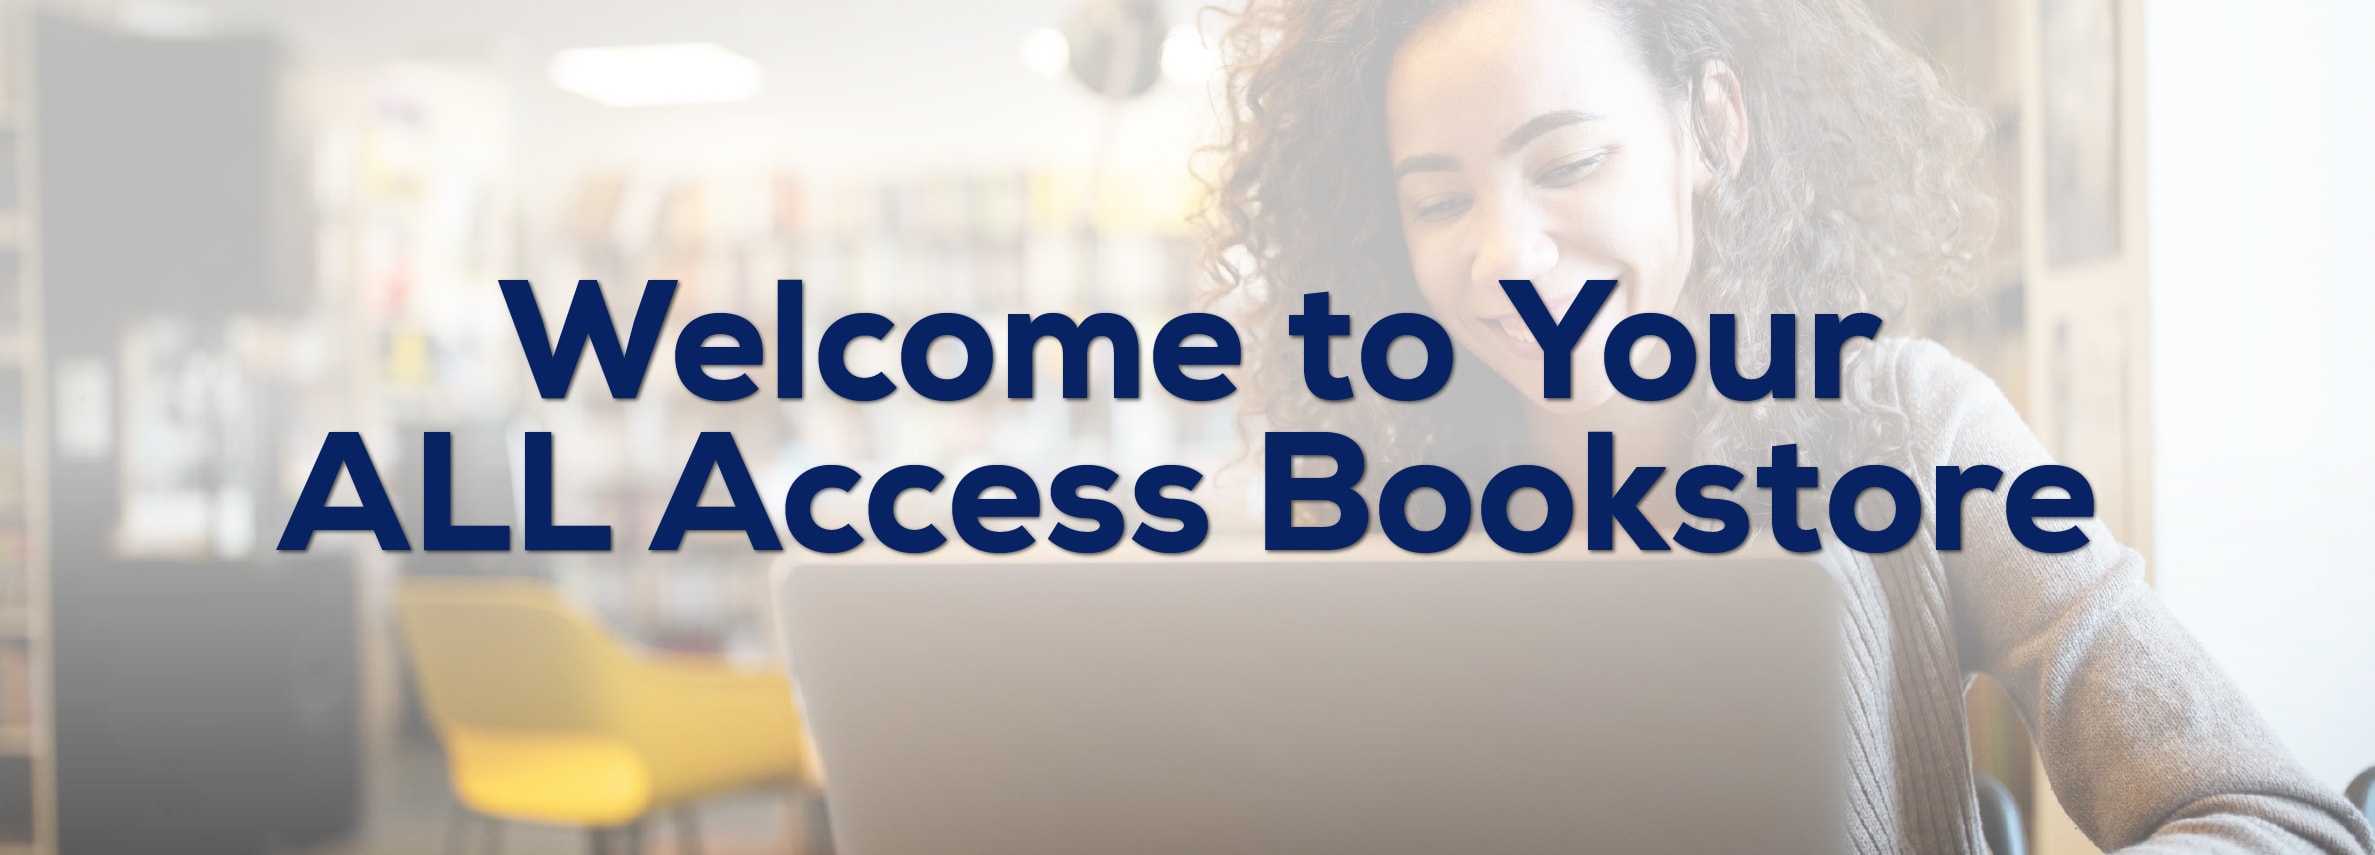 Welcome to Your ALL Access Bookstore